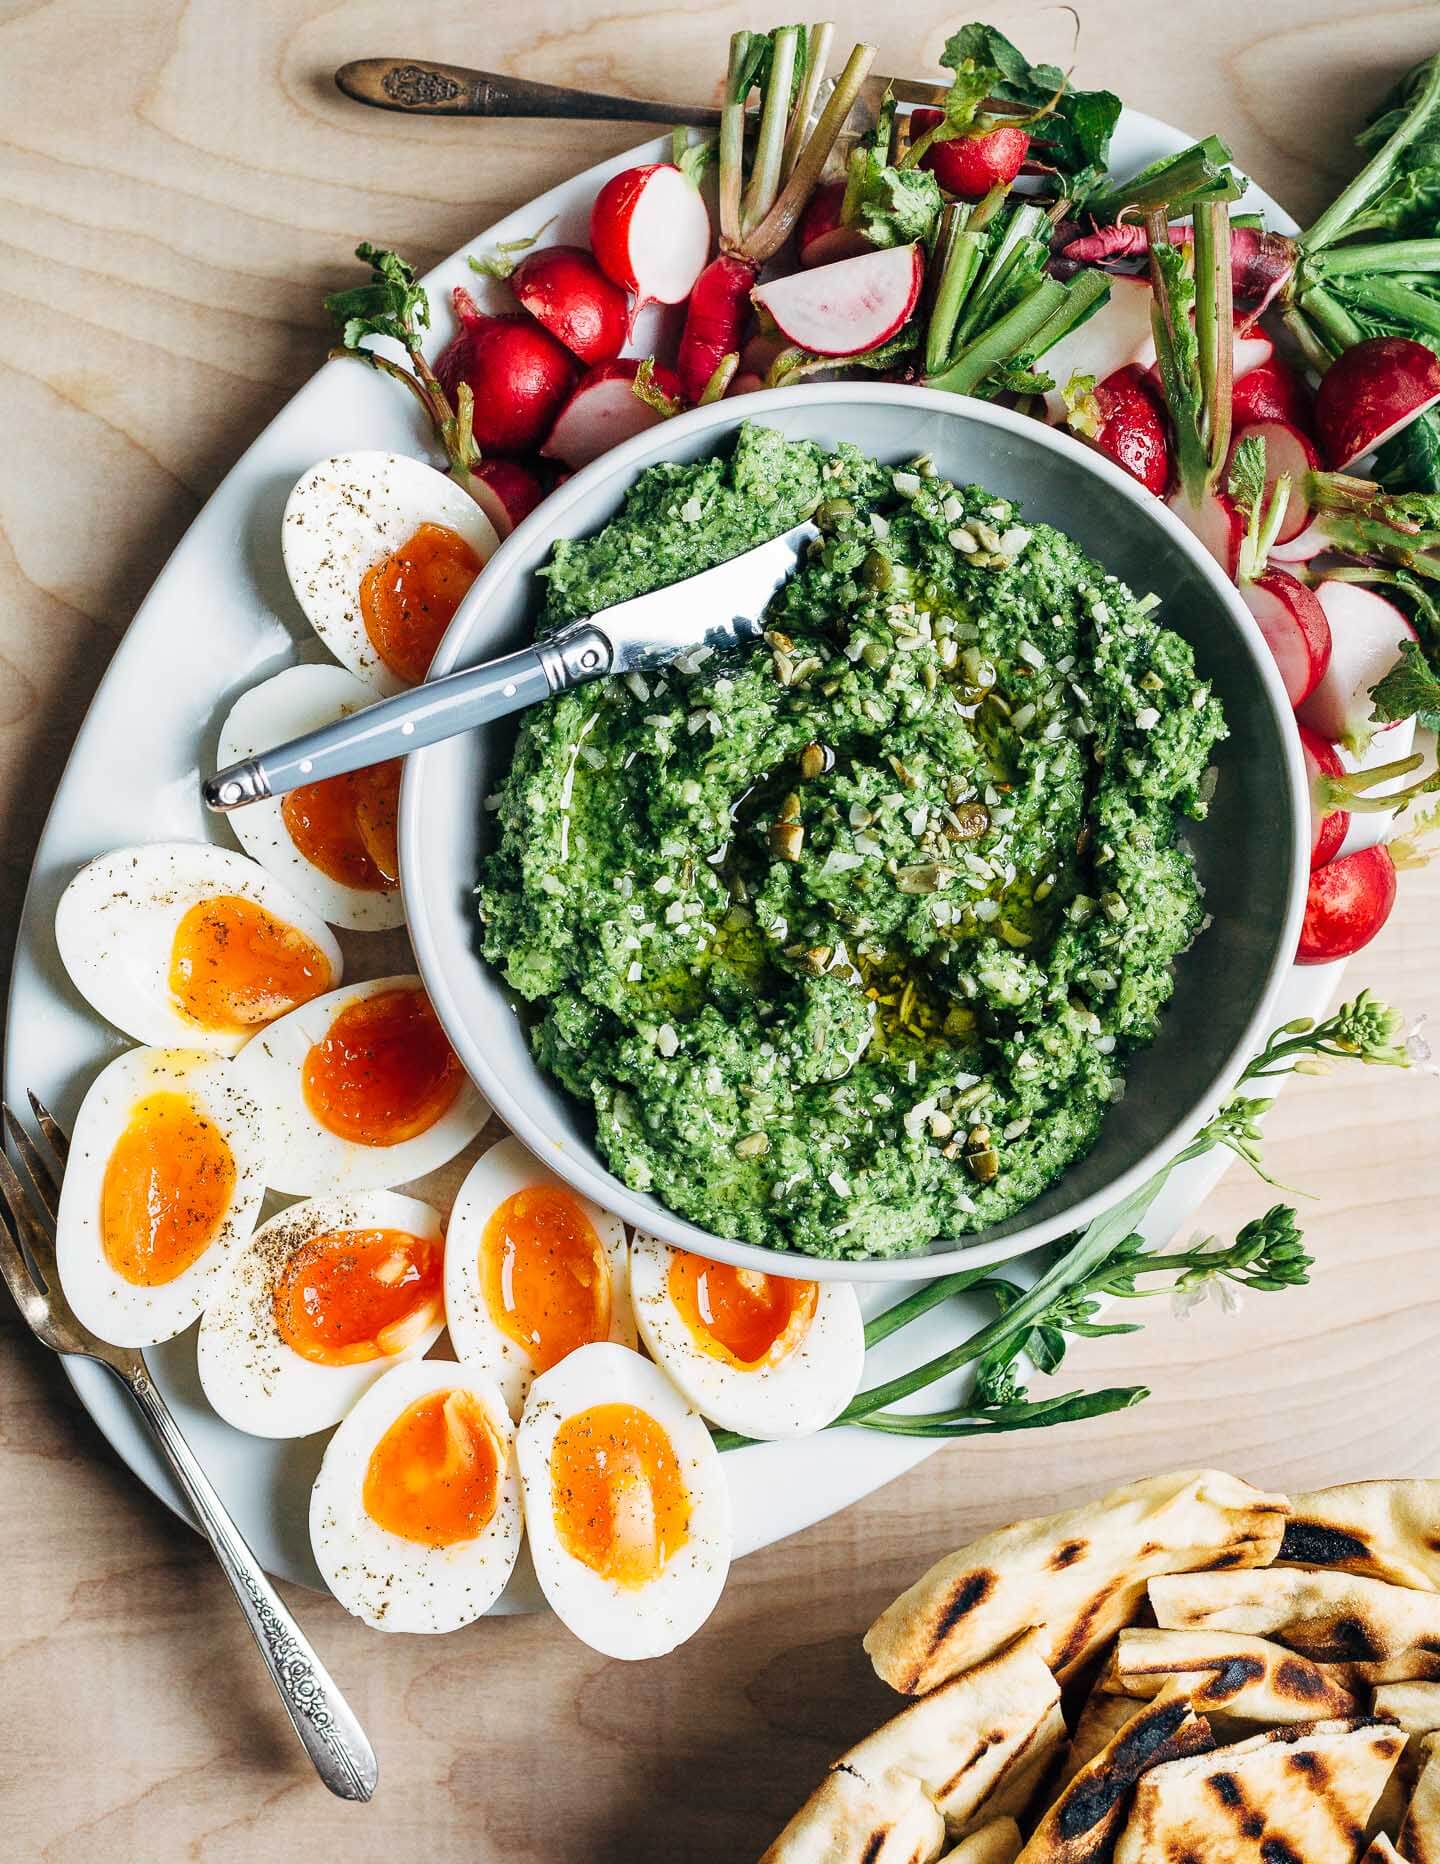 A versatile recipe for green garlic pesto that comes straight from my spring garden. My green garlic pesto is made with radish greens and pepitas, and served alongside jammy steamed eggs and lemony sliced radishes.